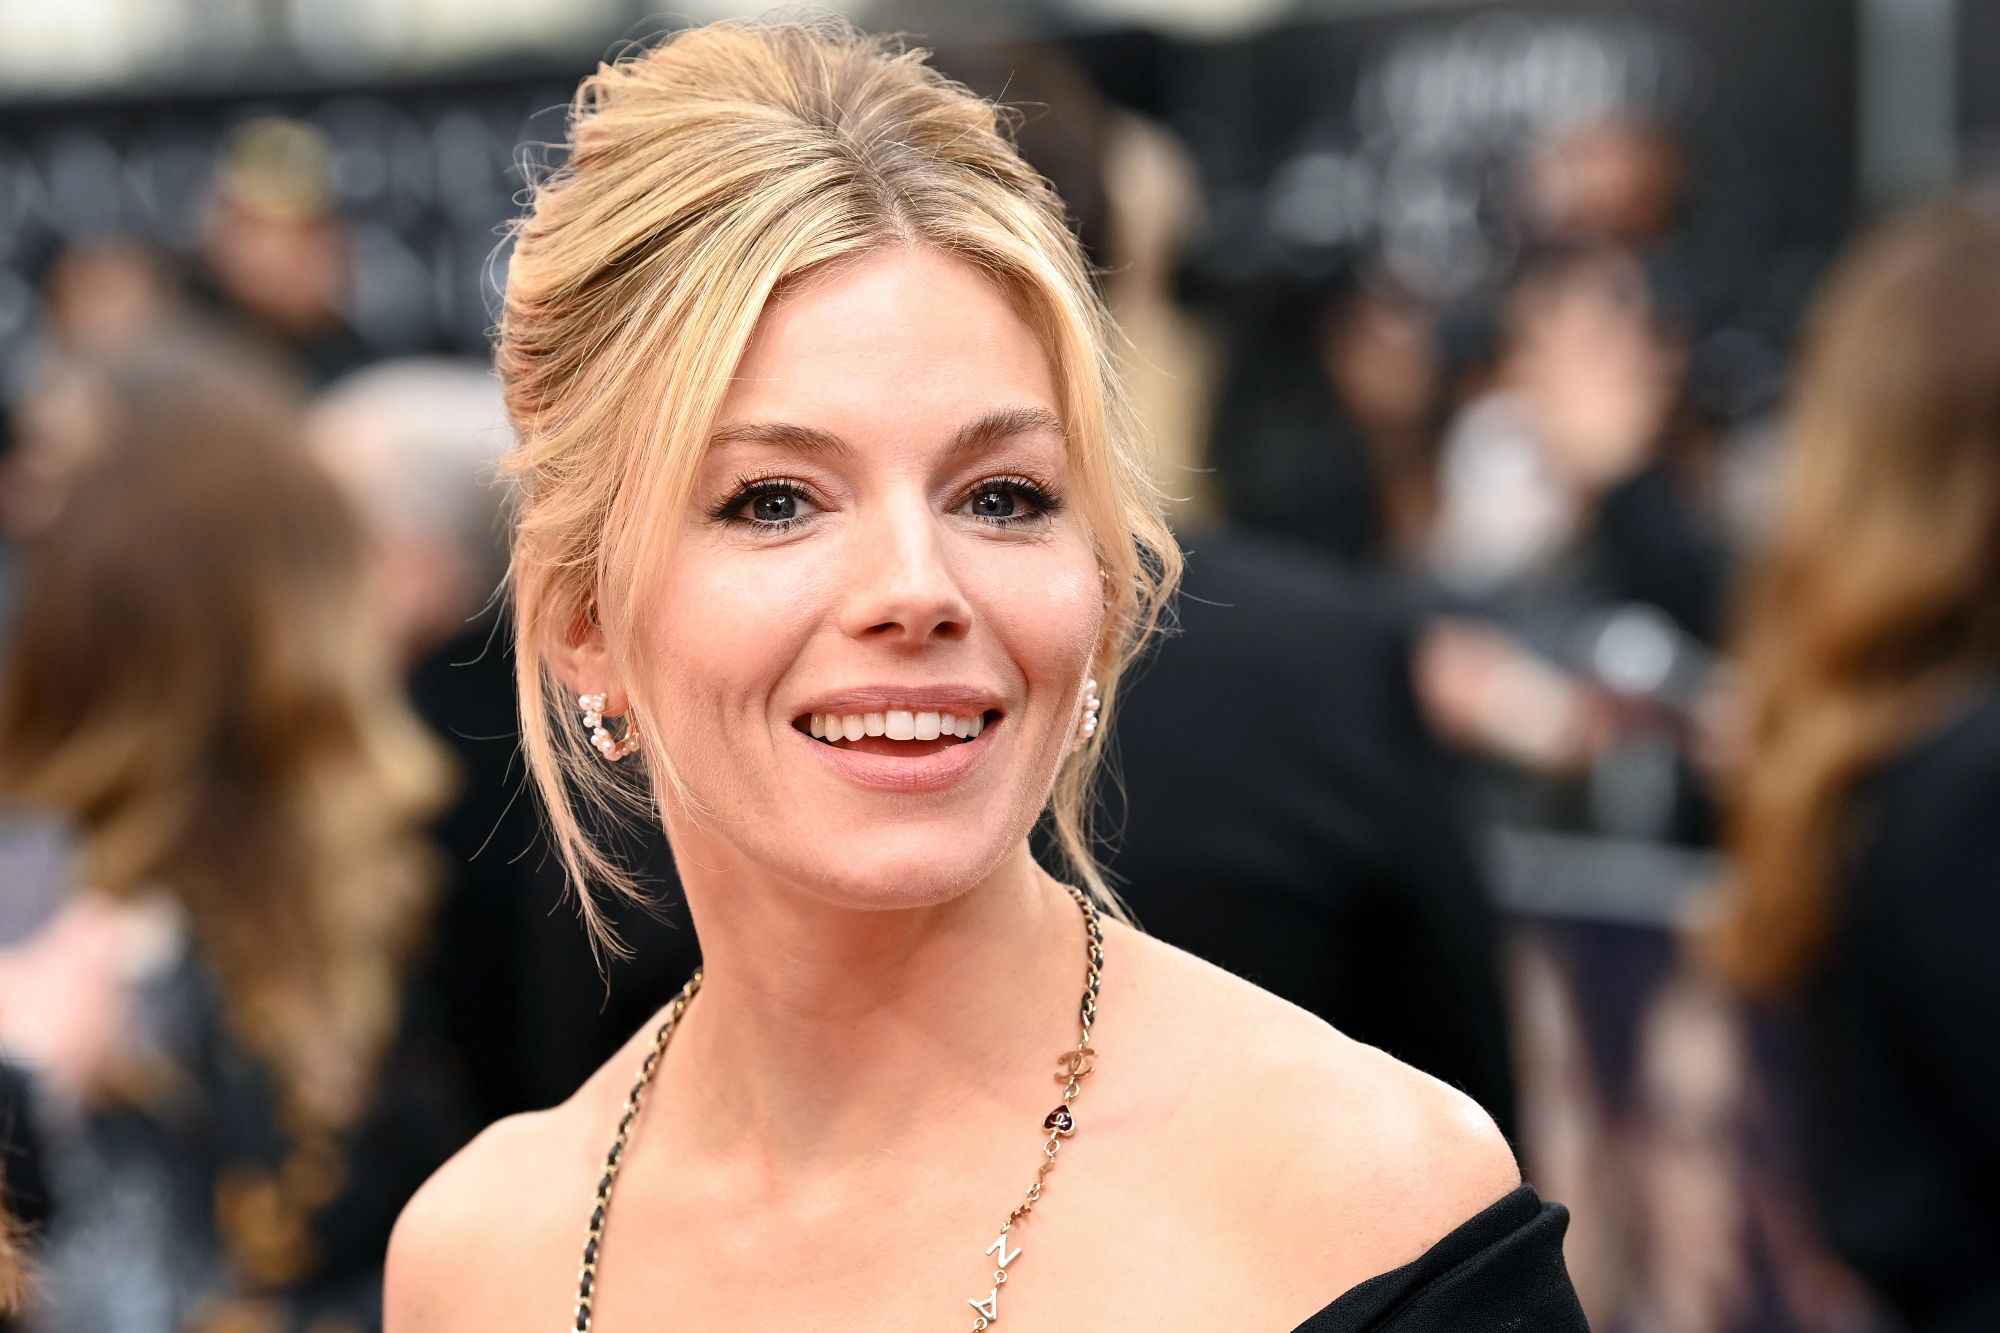 sienna-miller:-‘powerful’-broadway-exec-told-me-to-‘f–k-off’-after-asking-for-equal-pay-to-male-costar